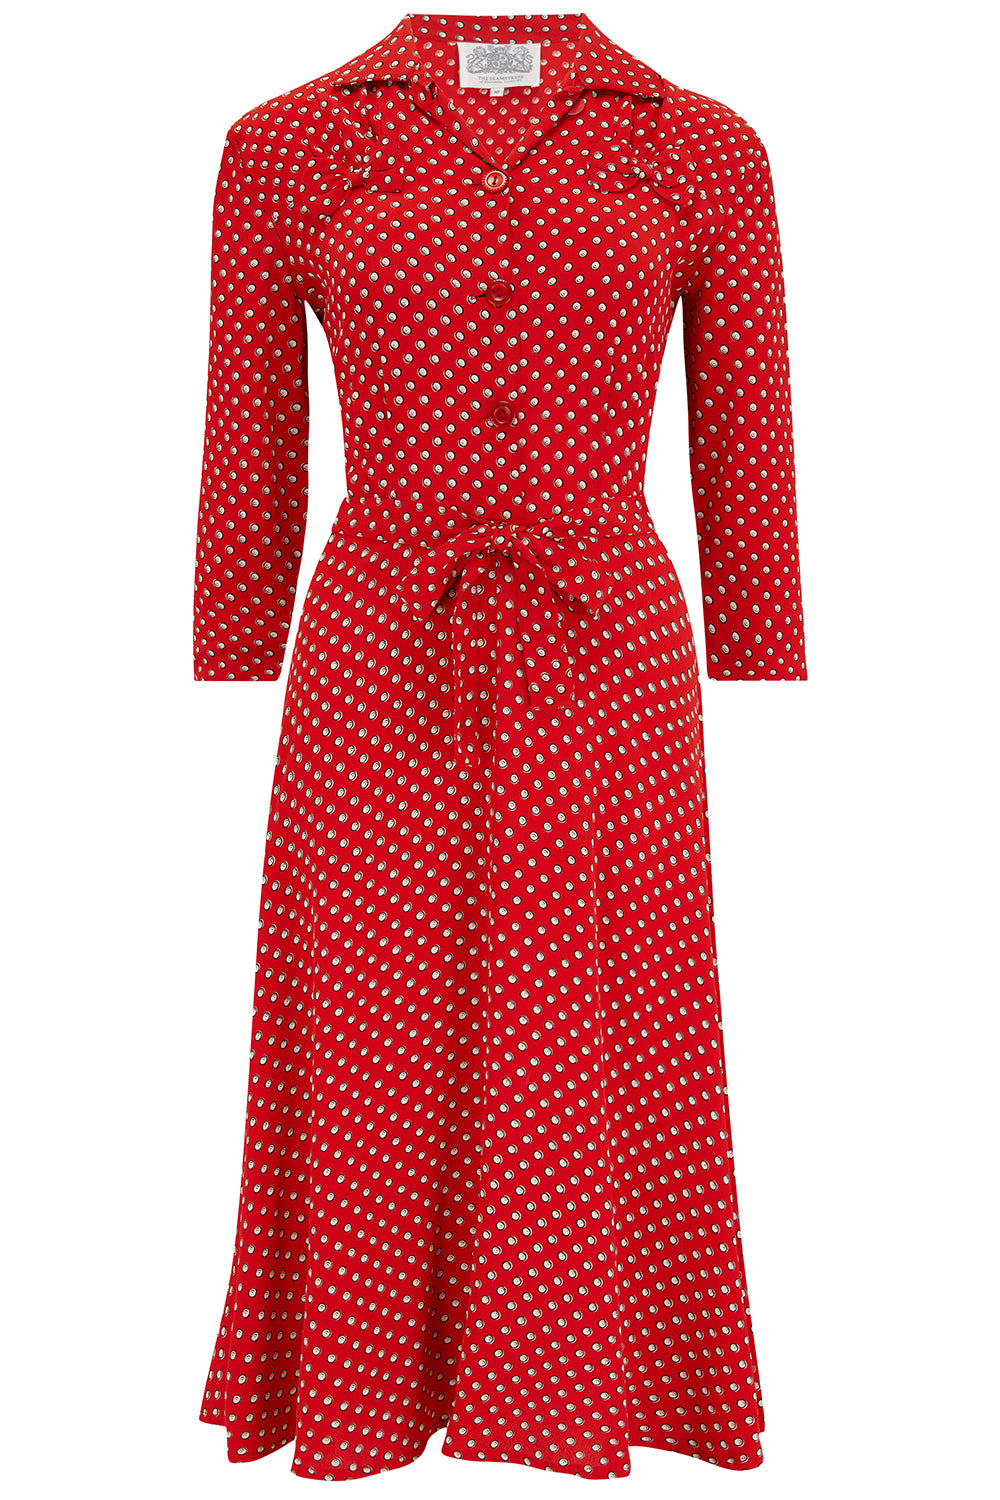 Polly Dress CC41 in Red Ditzy , Classic 1940s True Vintage Style - True and authentic vintage style clothing, inspired by the Classic styles of CC41 , WW2 and the fun 1950s RocknRoll era, for everyday wear plus events like Goodwood Revival, Twinwood Festival and Viva Las Vegas Rockabilly Weekend Rock n Romance The Seamstress of Bloomsbury